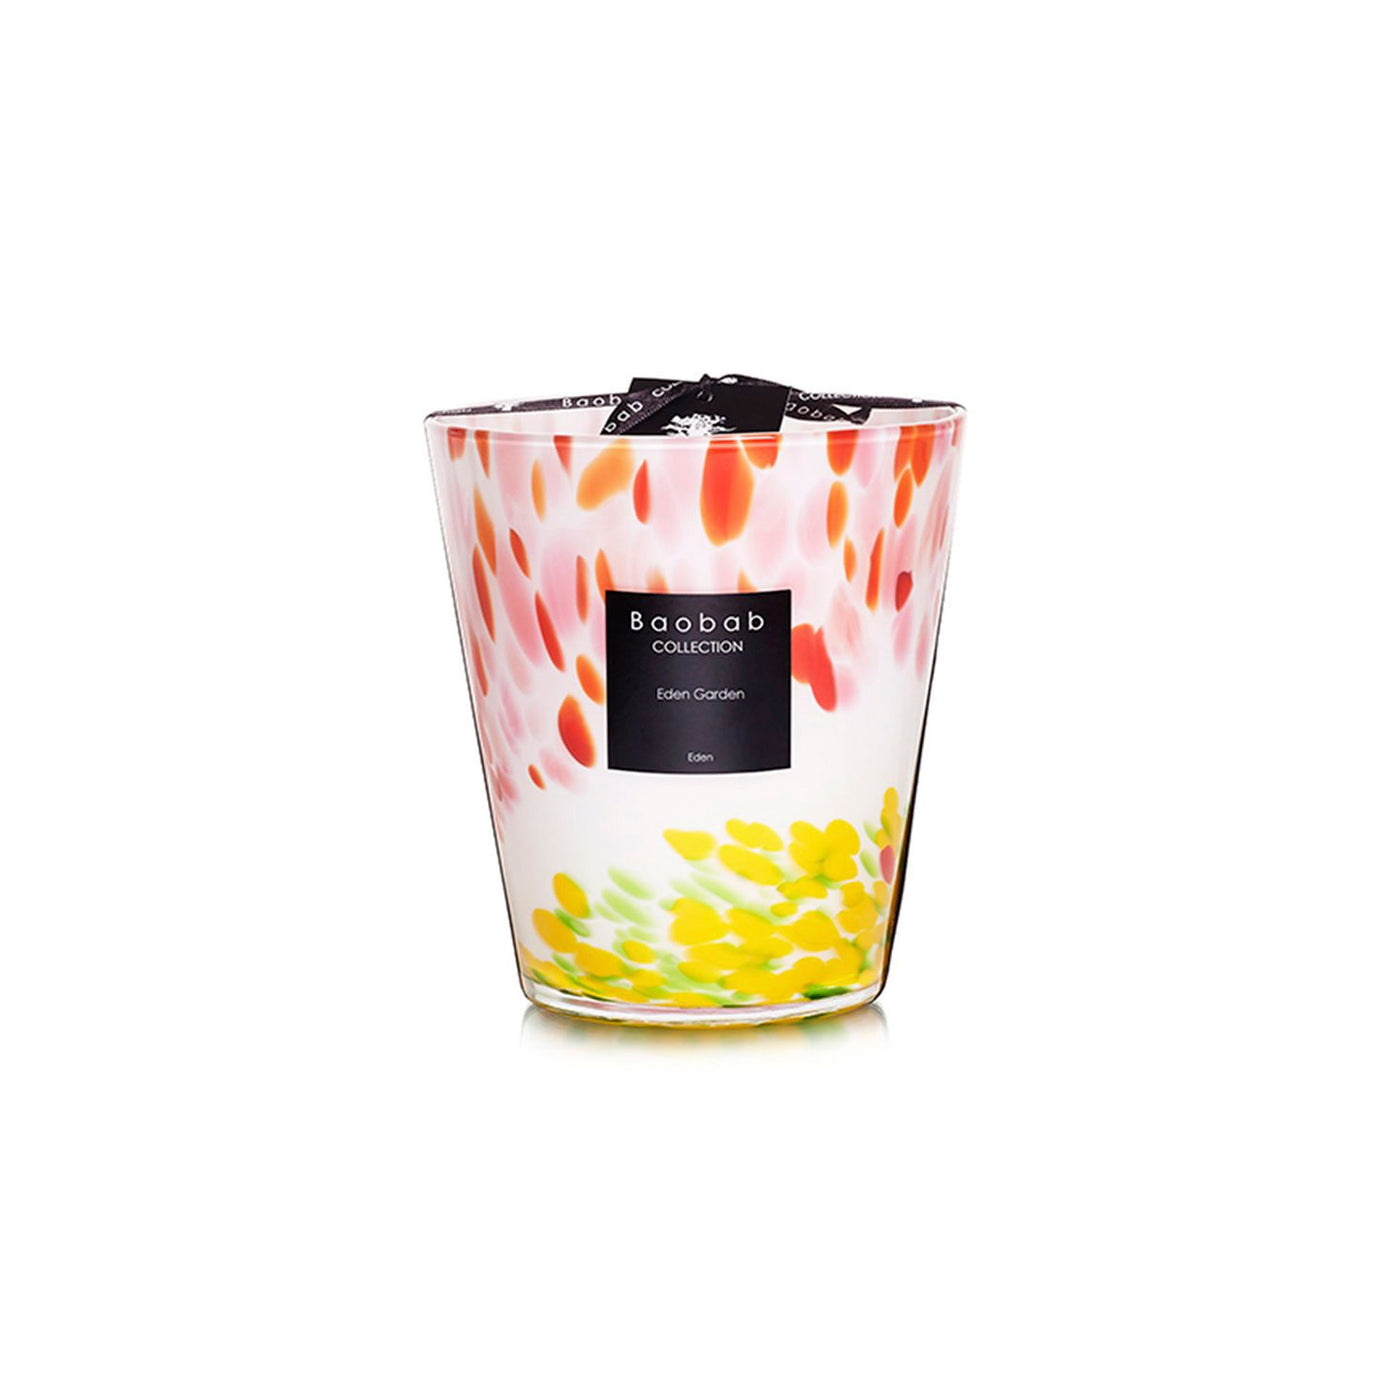 Eden Garden Scented Candles , Baobab Collection, Candles + Diffusers- Julia Moss Designs